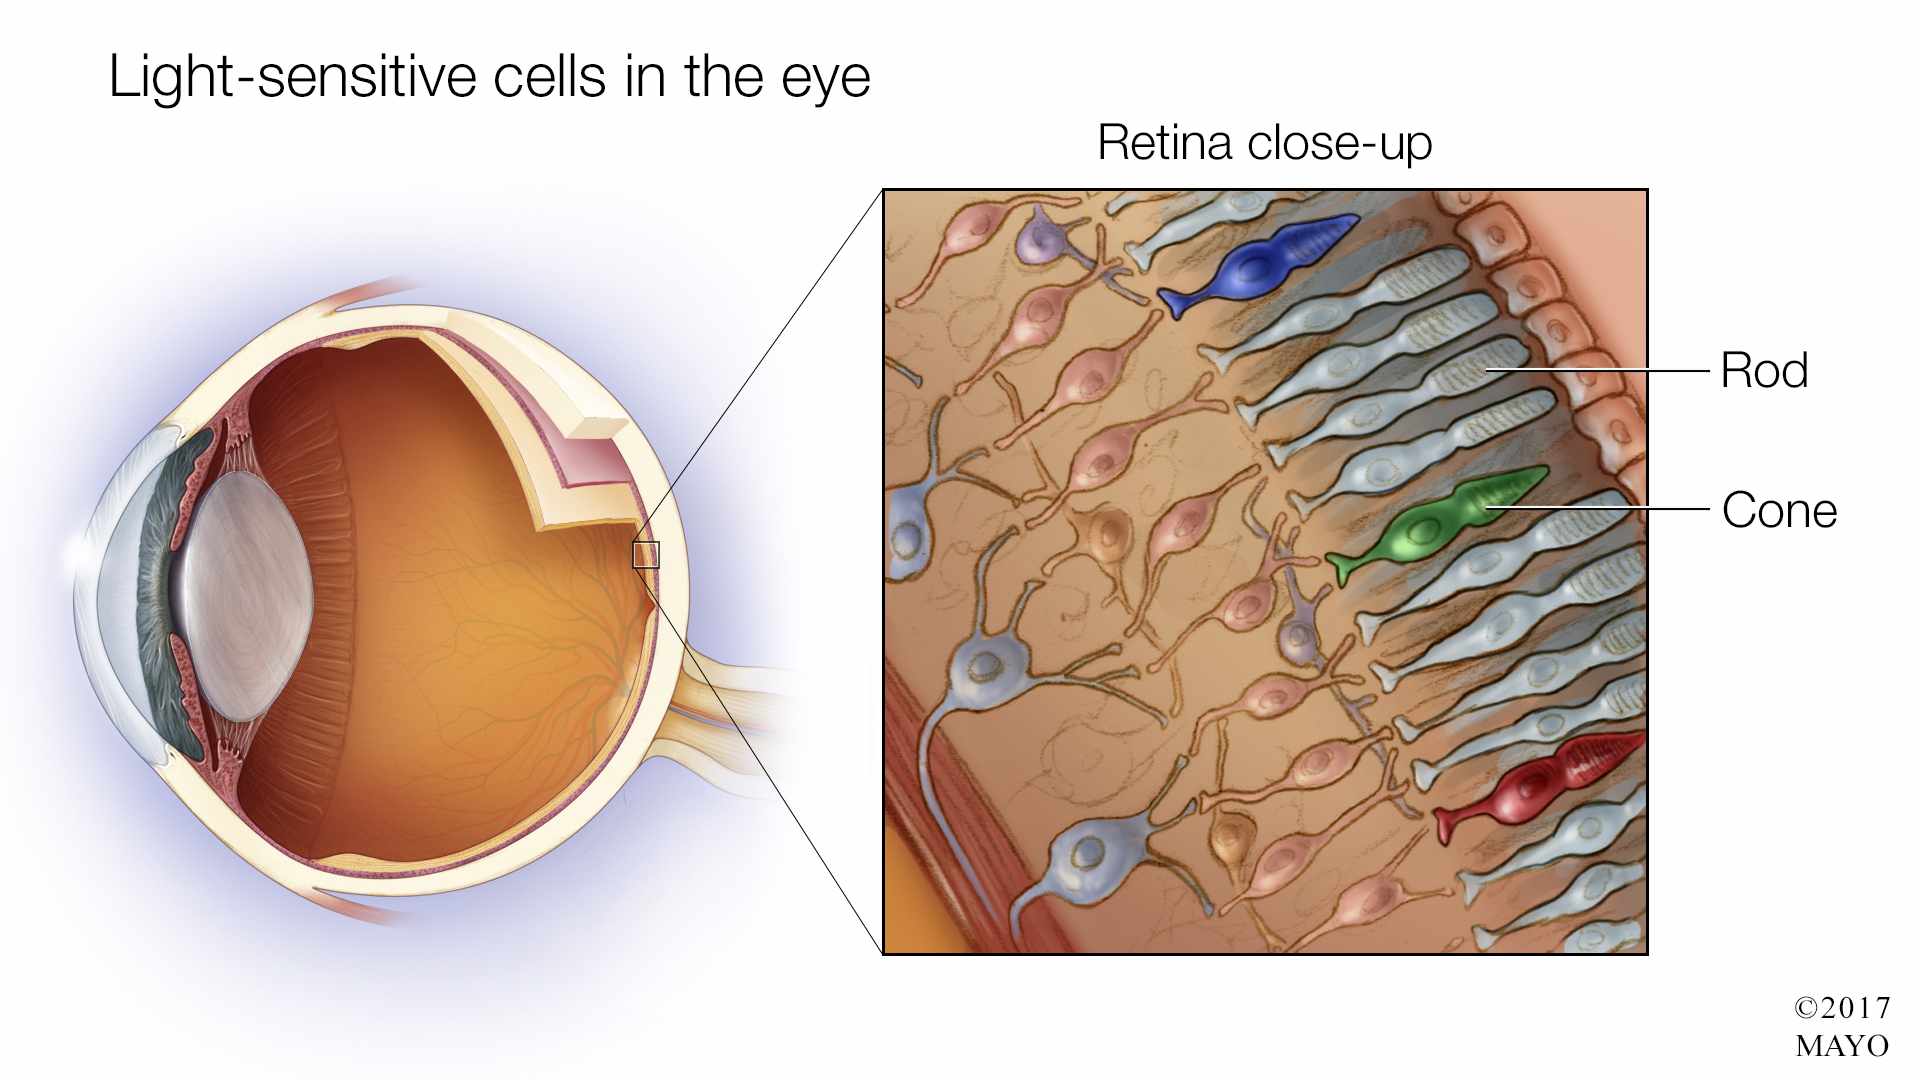 a medical illustration of light-sensitive cells in the eye with close-up of the retina, rods and cones